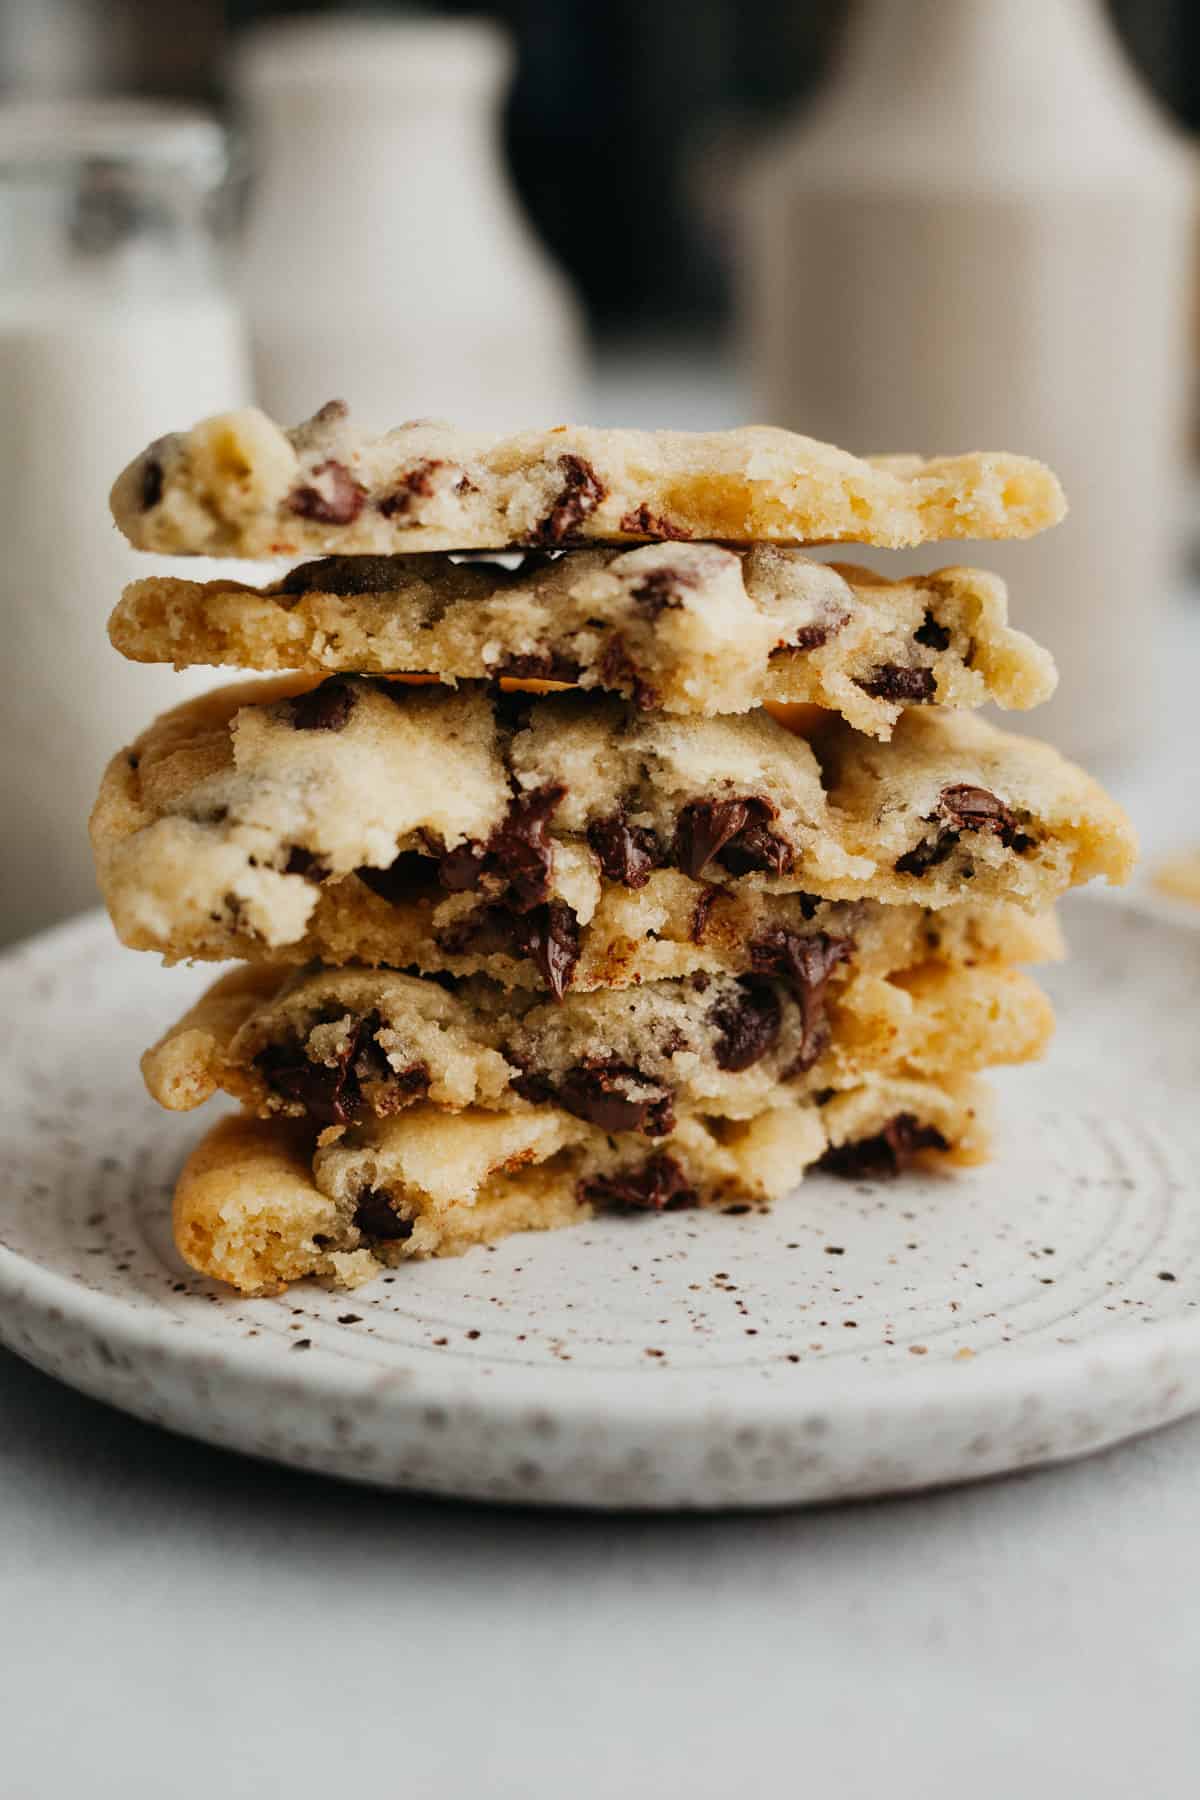 A stack of chocolate chip cookies broken in half on a small plate.